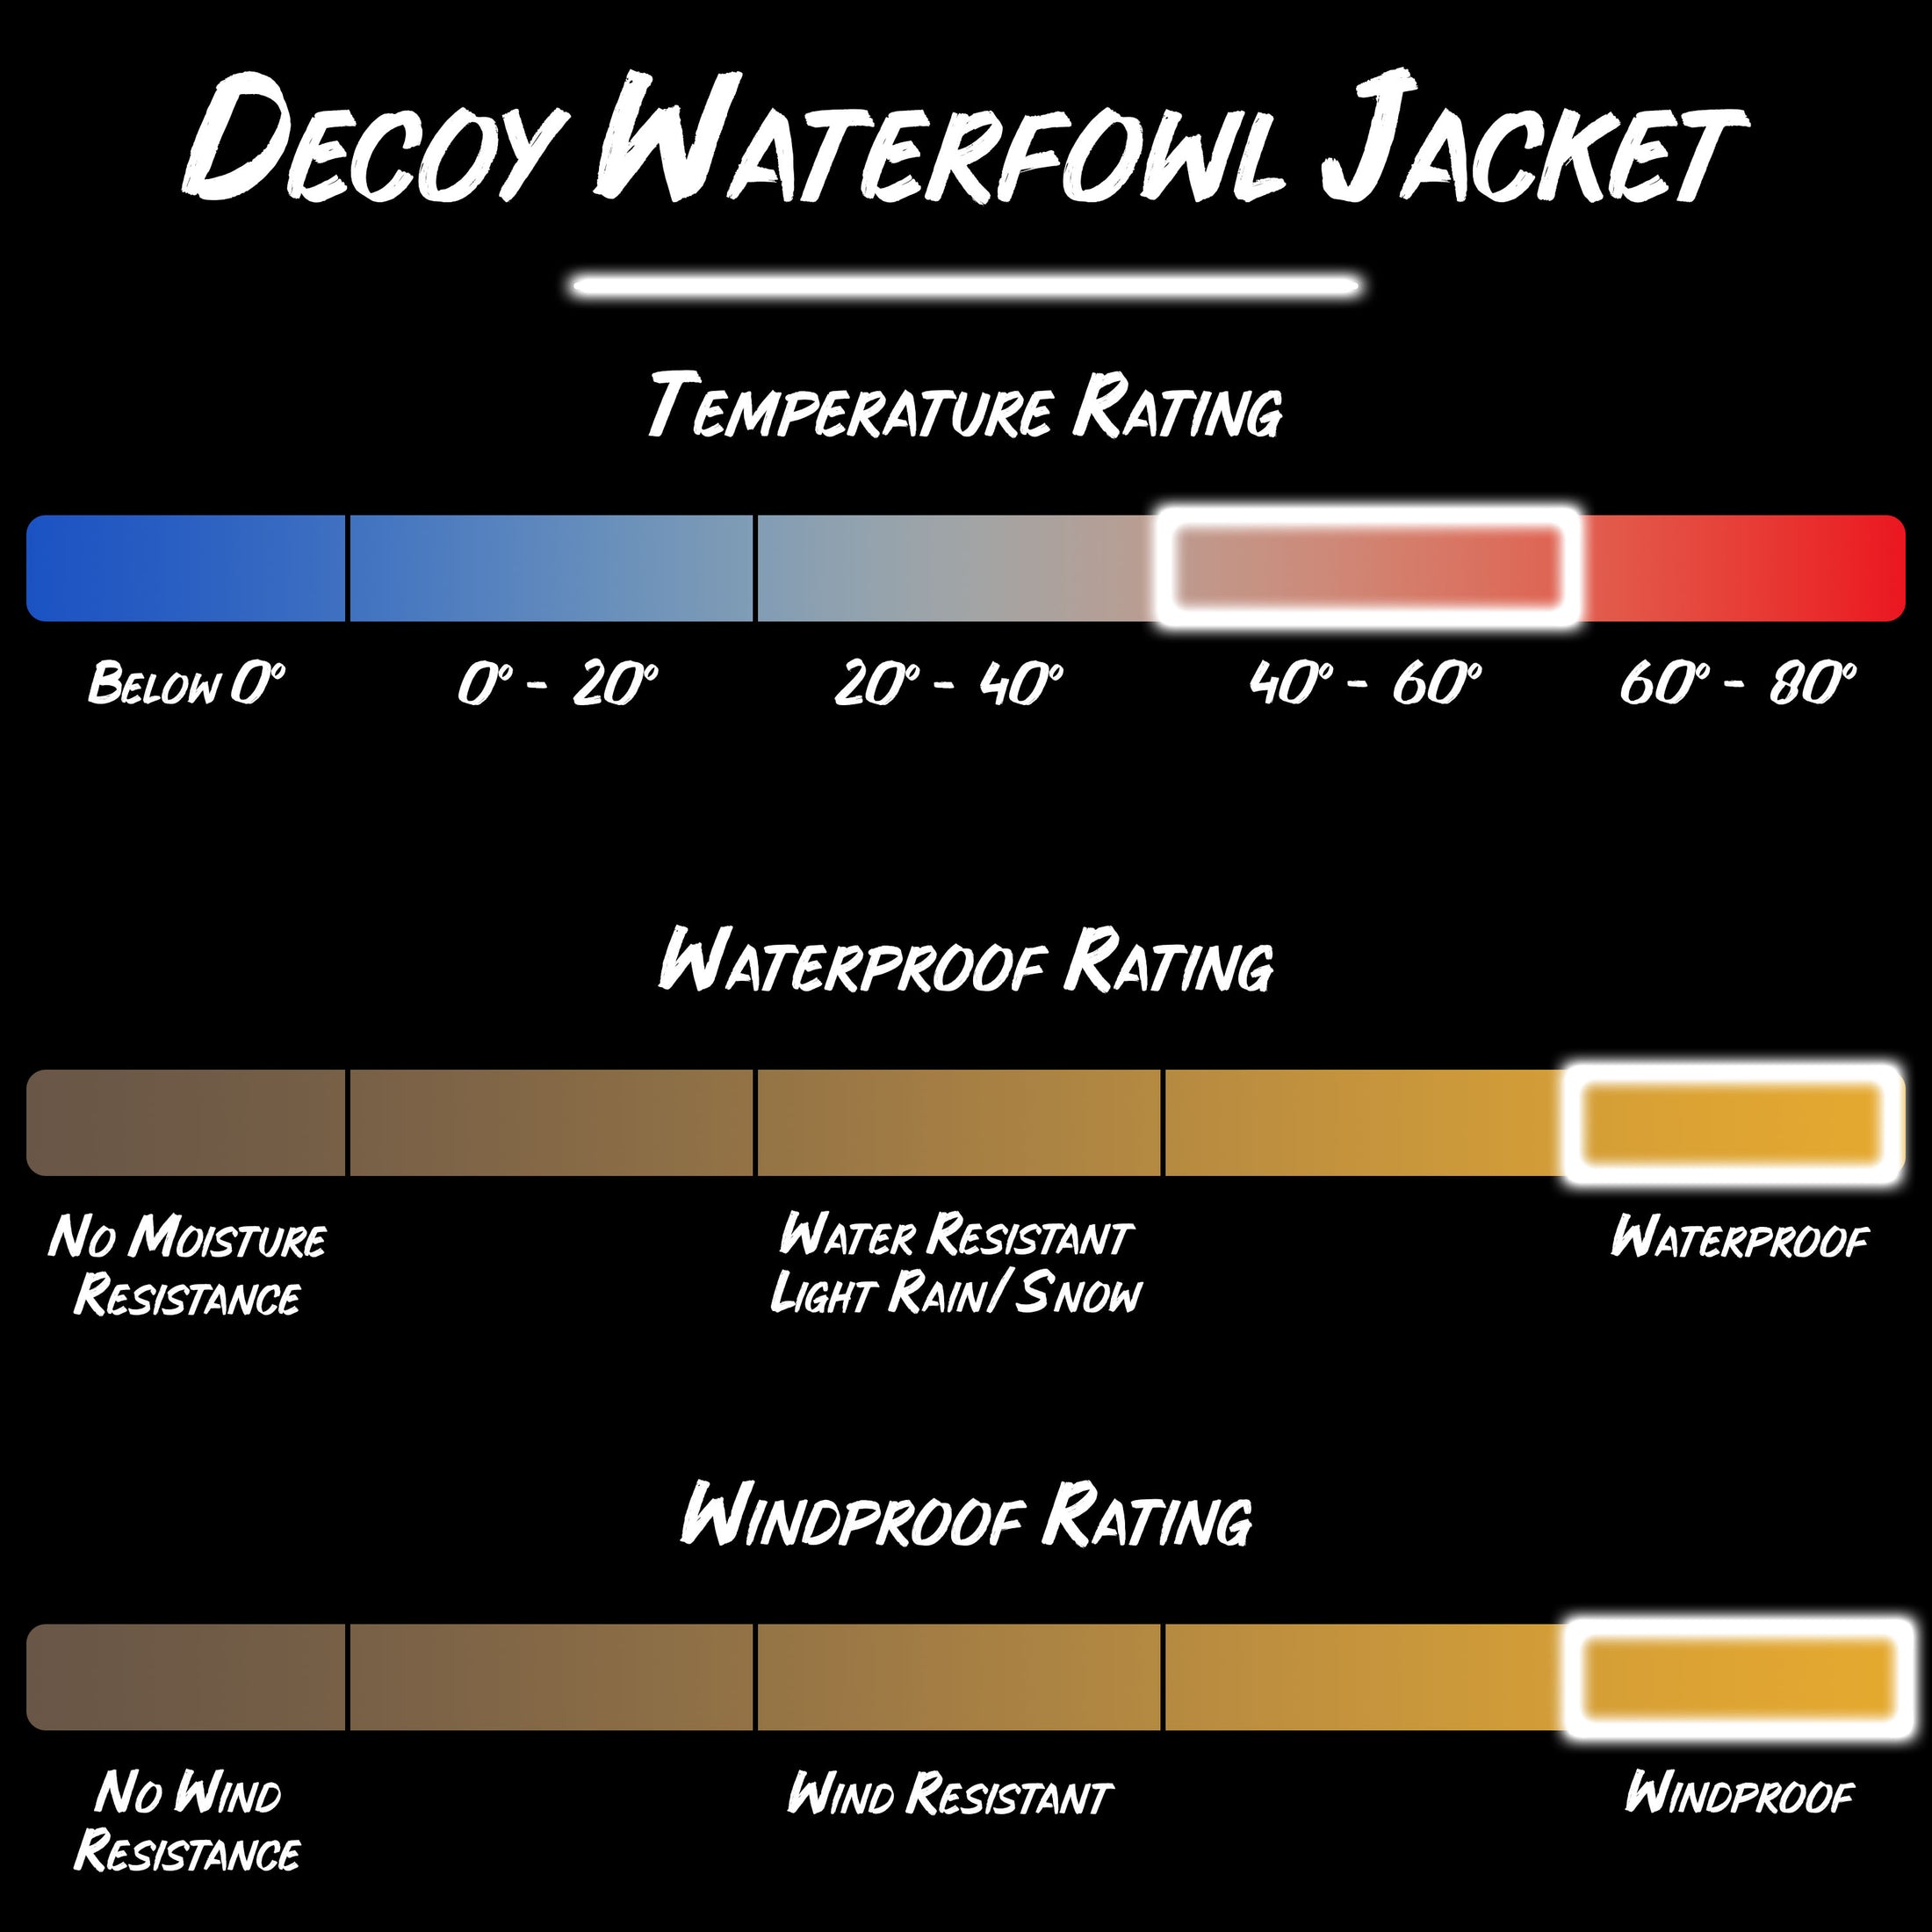 Gamehide decoy waterfowl jacket product specifications. 